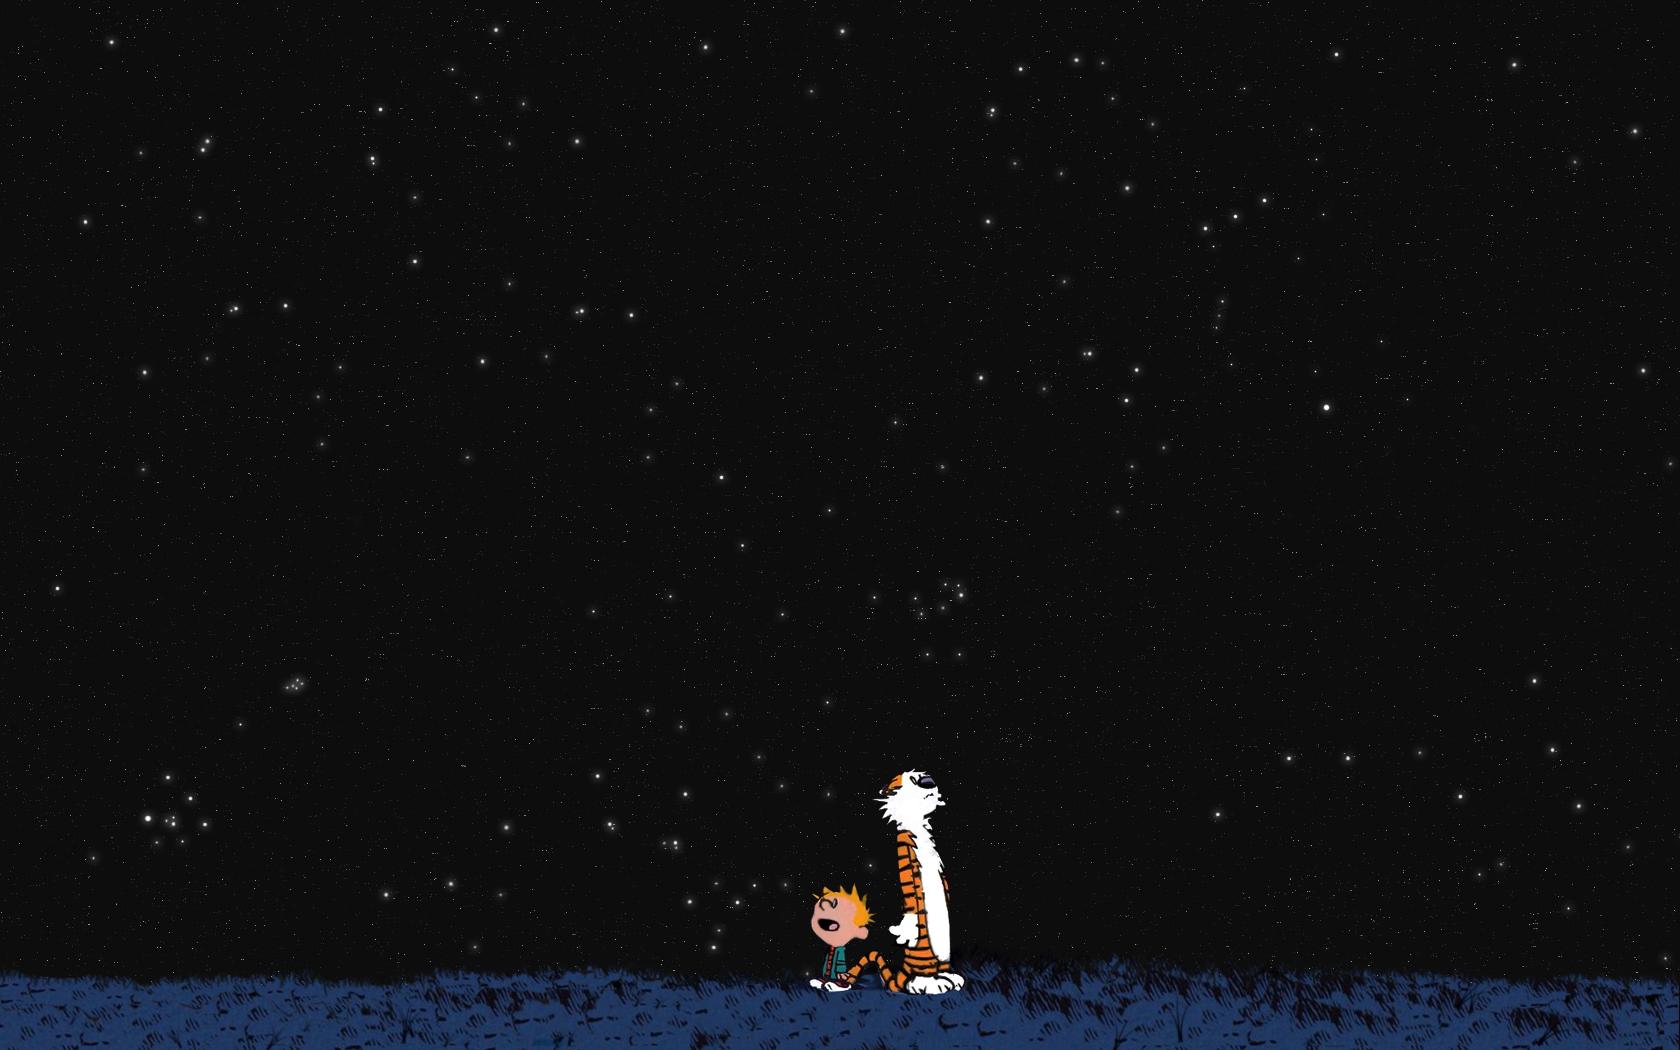 Calvin And Hobbes Wallpaper With Extra On The Bottom So They Sit Above